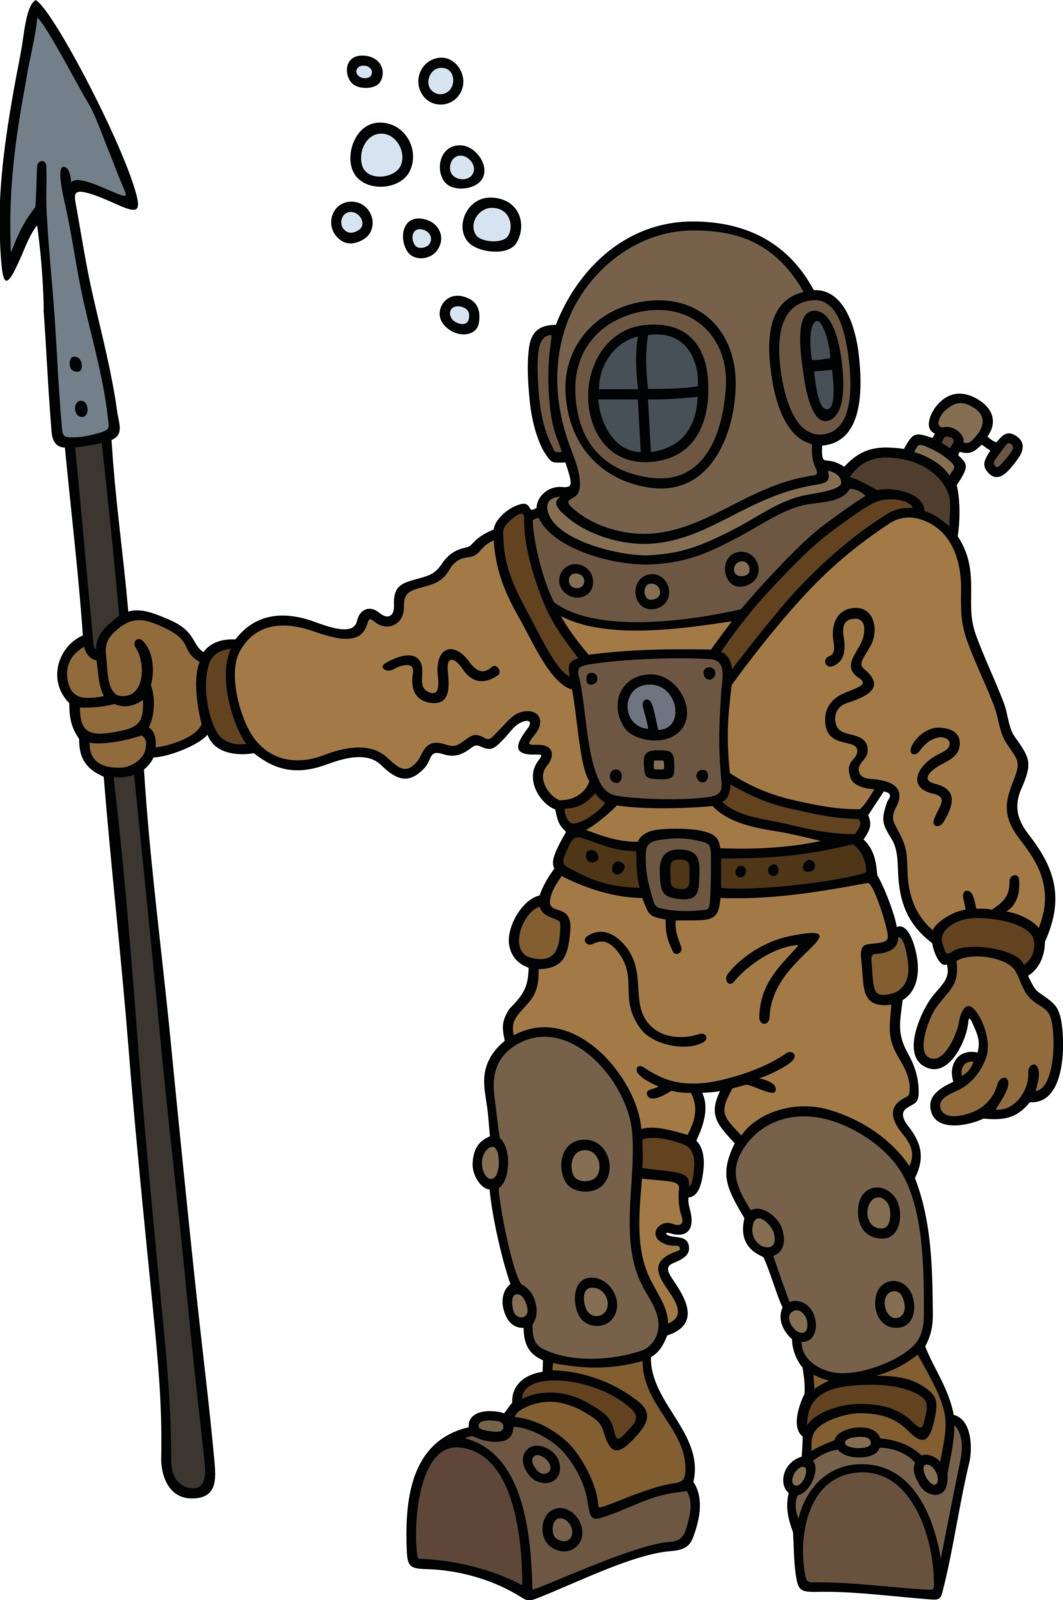 Hand drawing of a vintage underwater deep diver with a harpoon